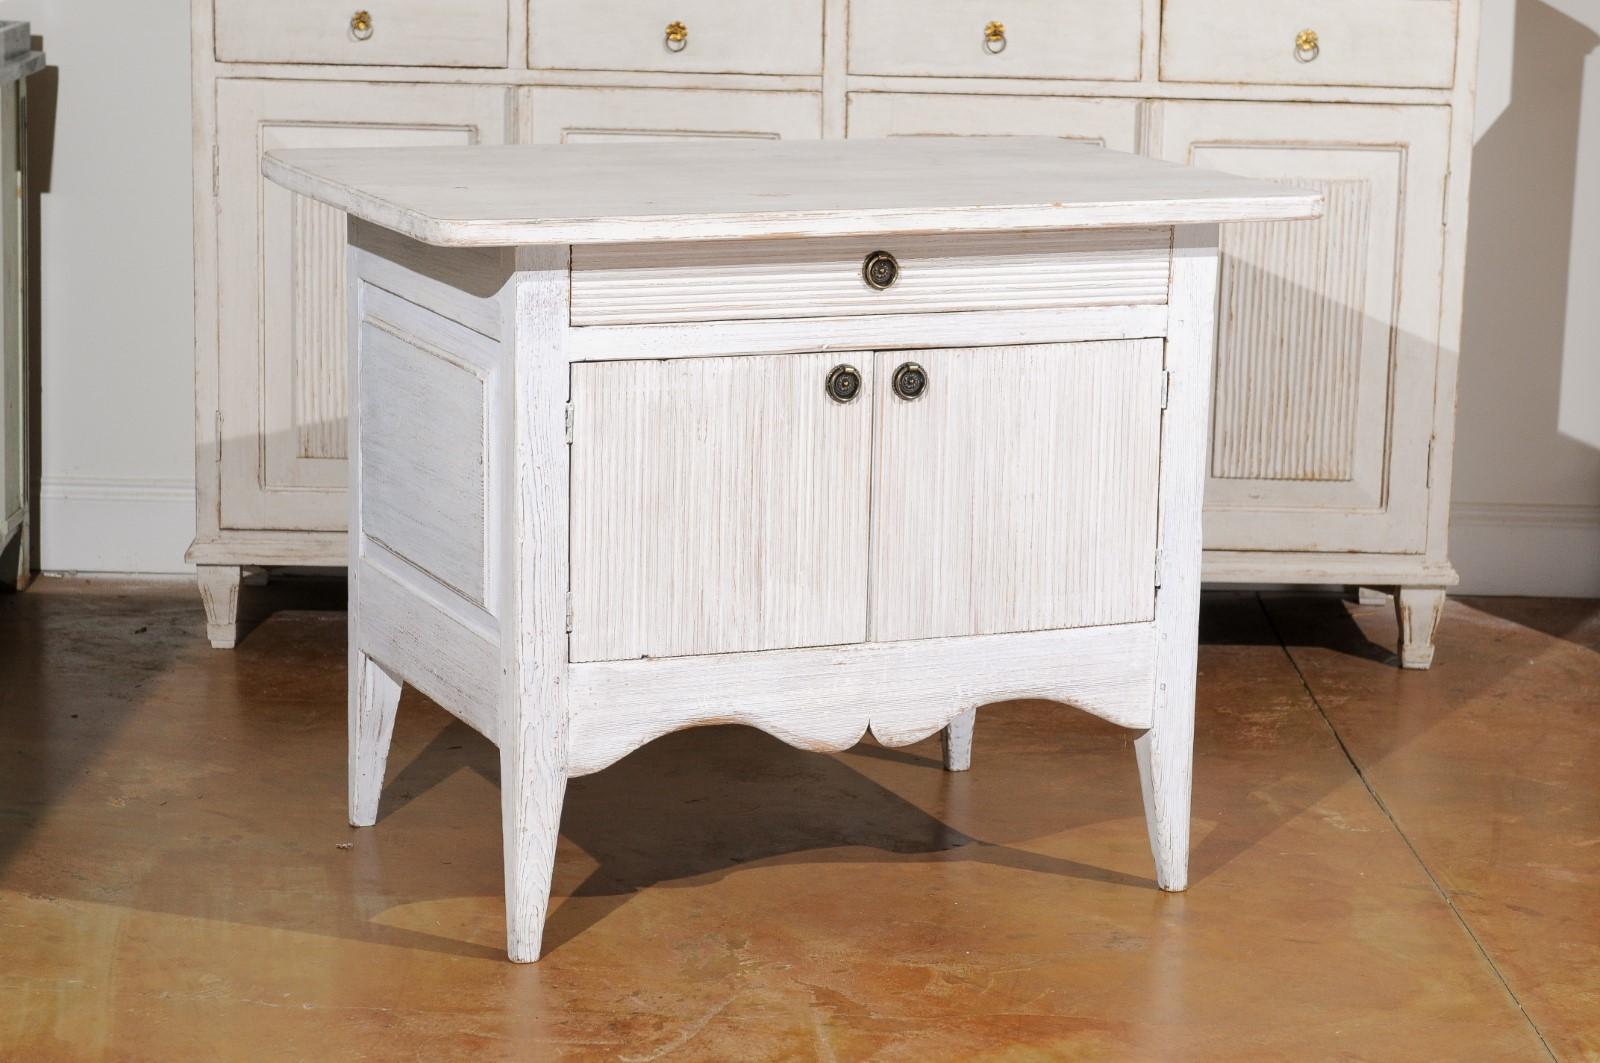 A Swedish Gustavian style painted sideboard from the 19th century, with reeded motifs, single drawer over double doors. Created in Sweden during the 19th century, this painted sideboard features a rectangular top with rounded corners, overhanging a